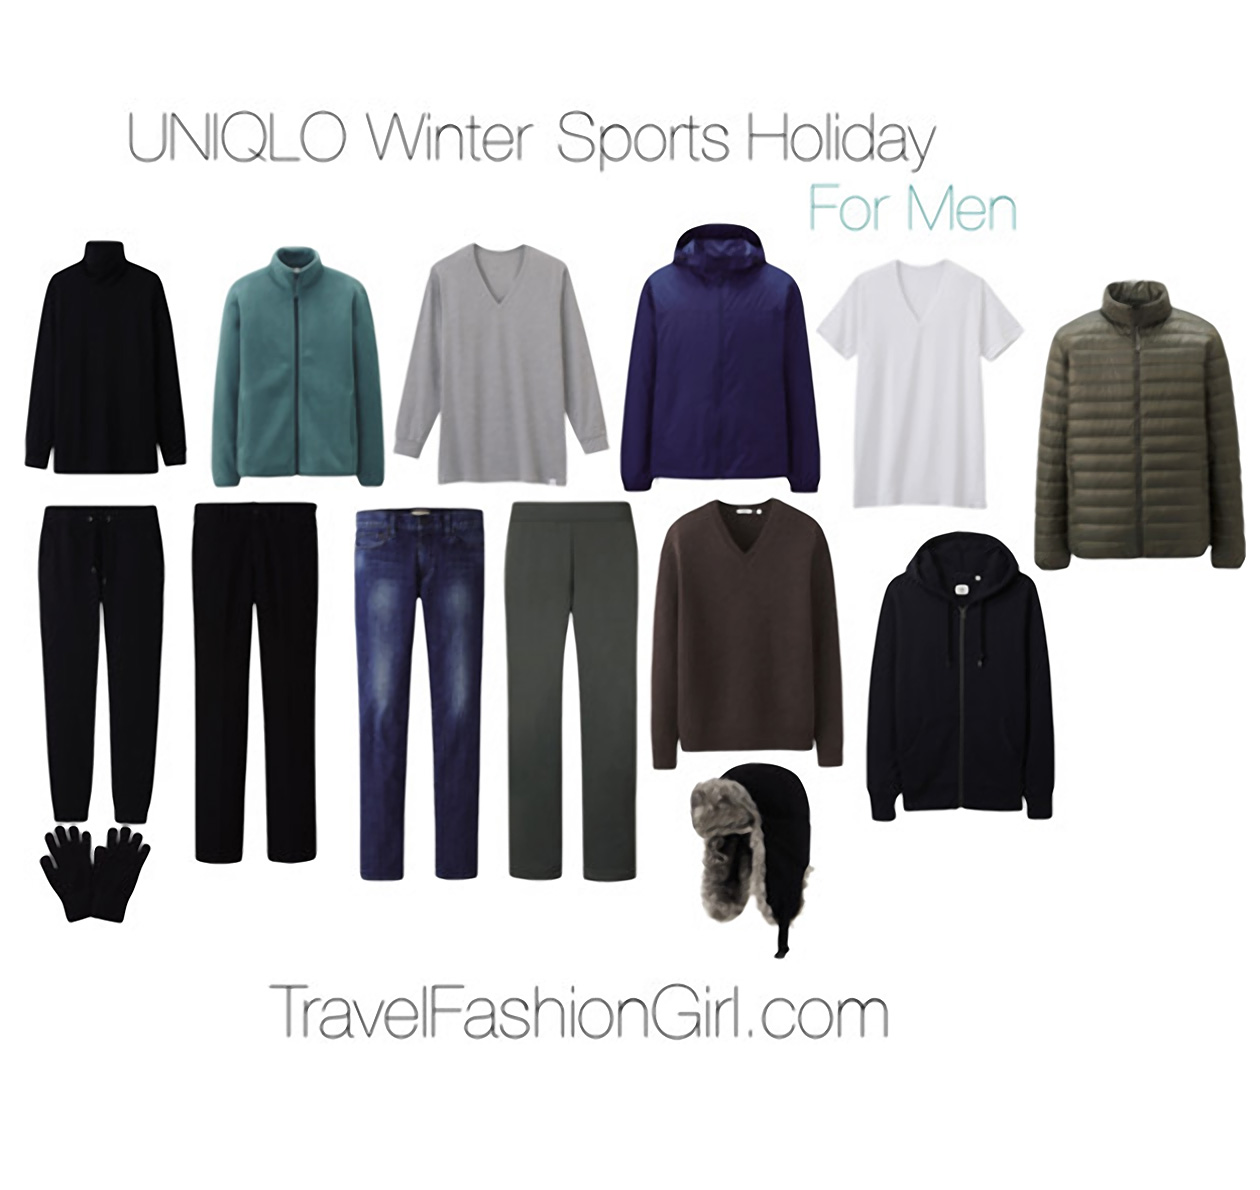 ultralight-warmth-uniqlo-winter-sports-holiday-packing-list